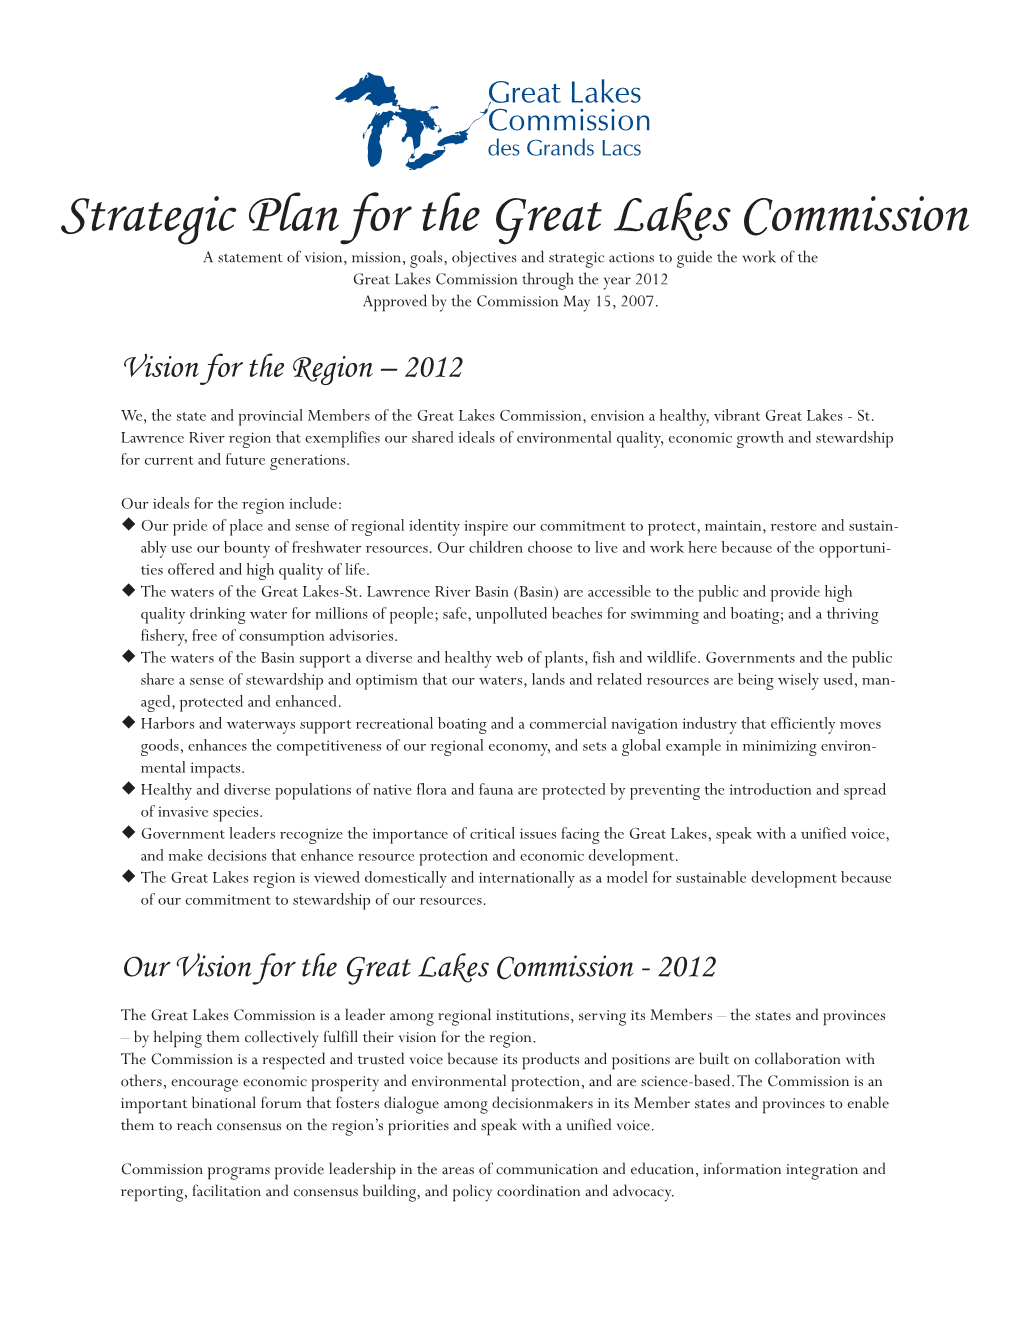 Strategic Plan for the Great Lakes Commission